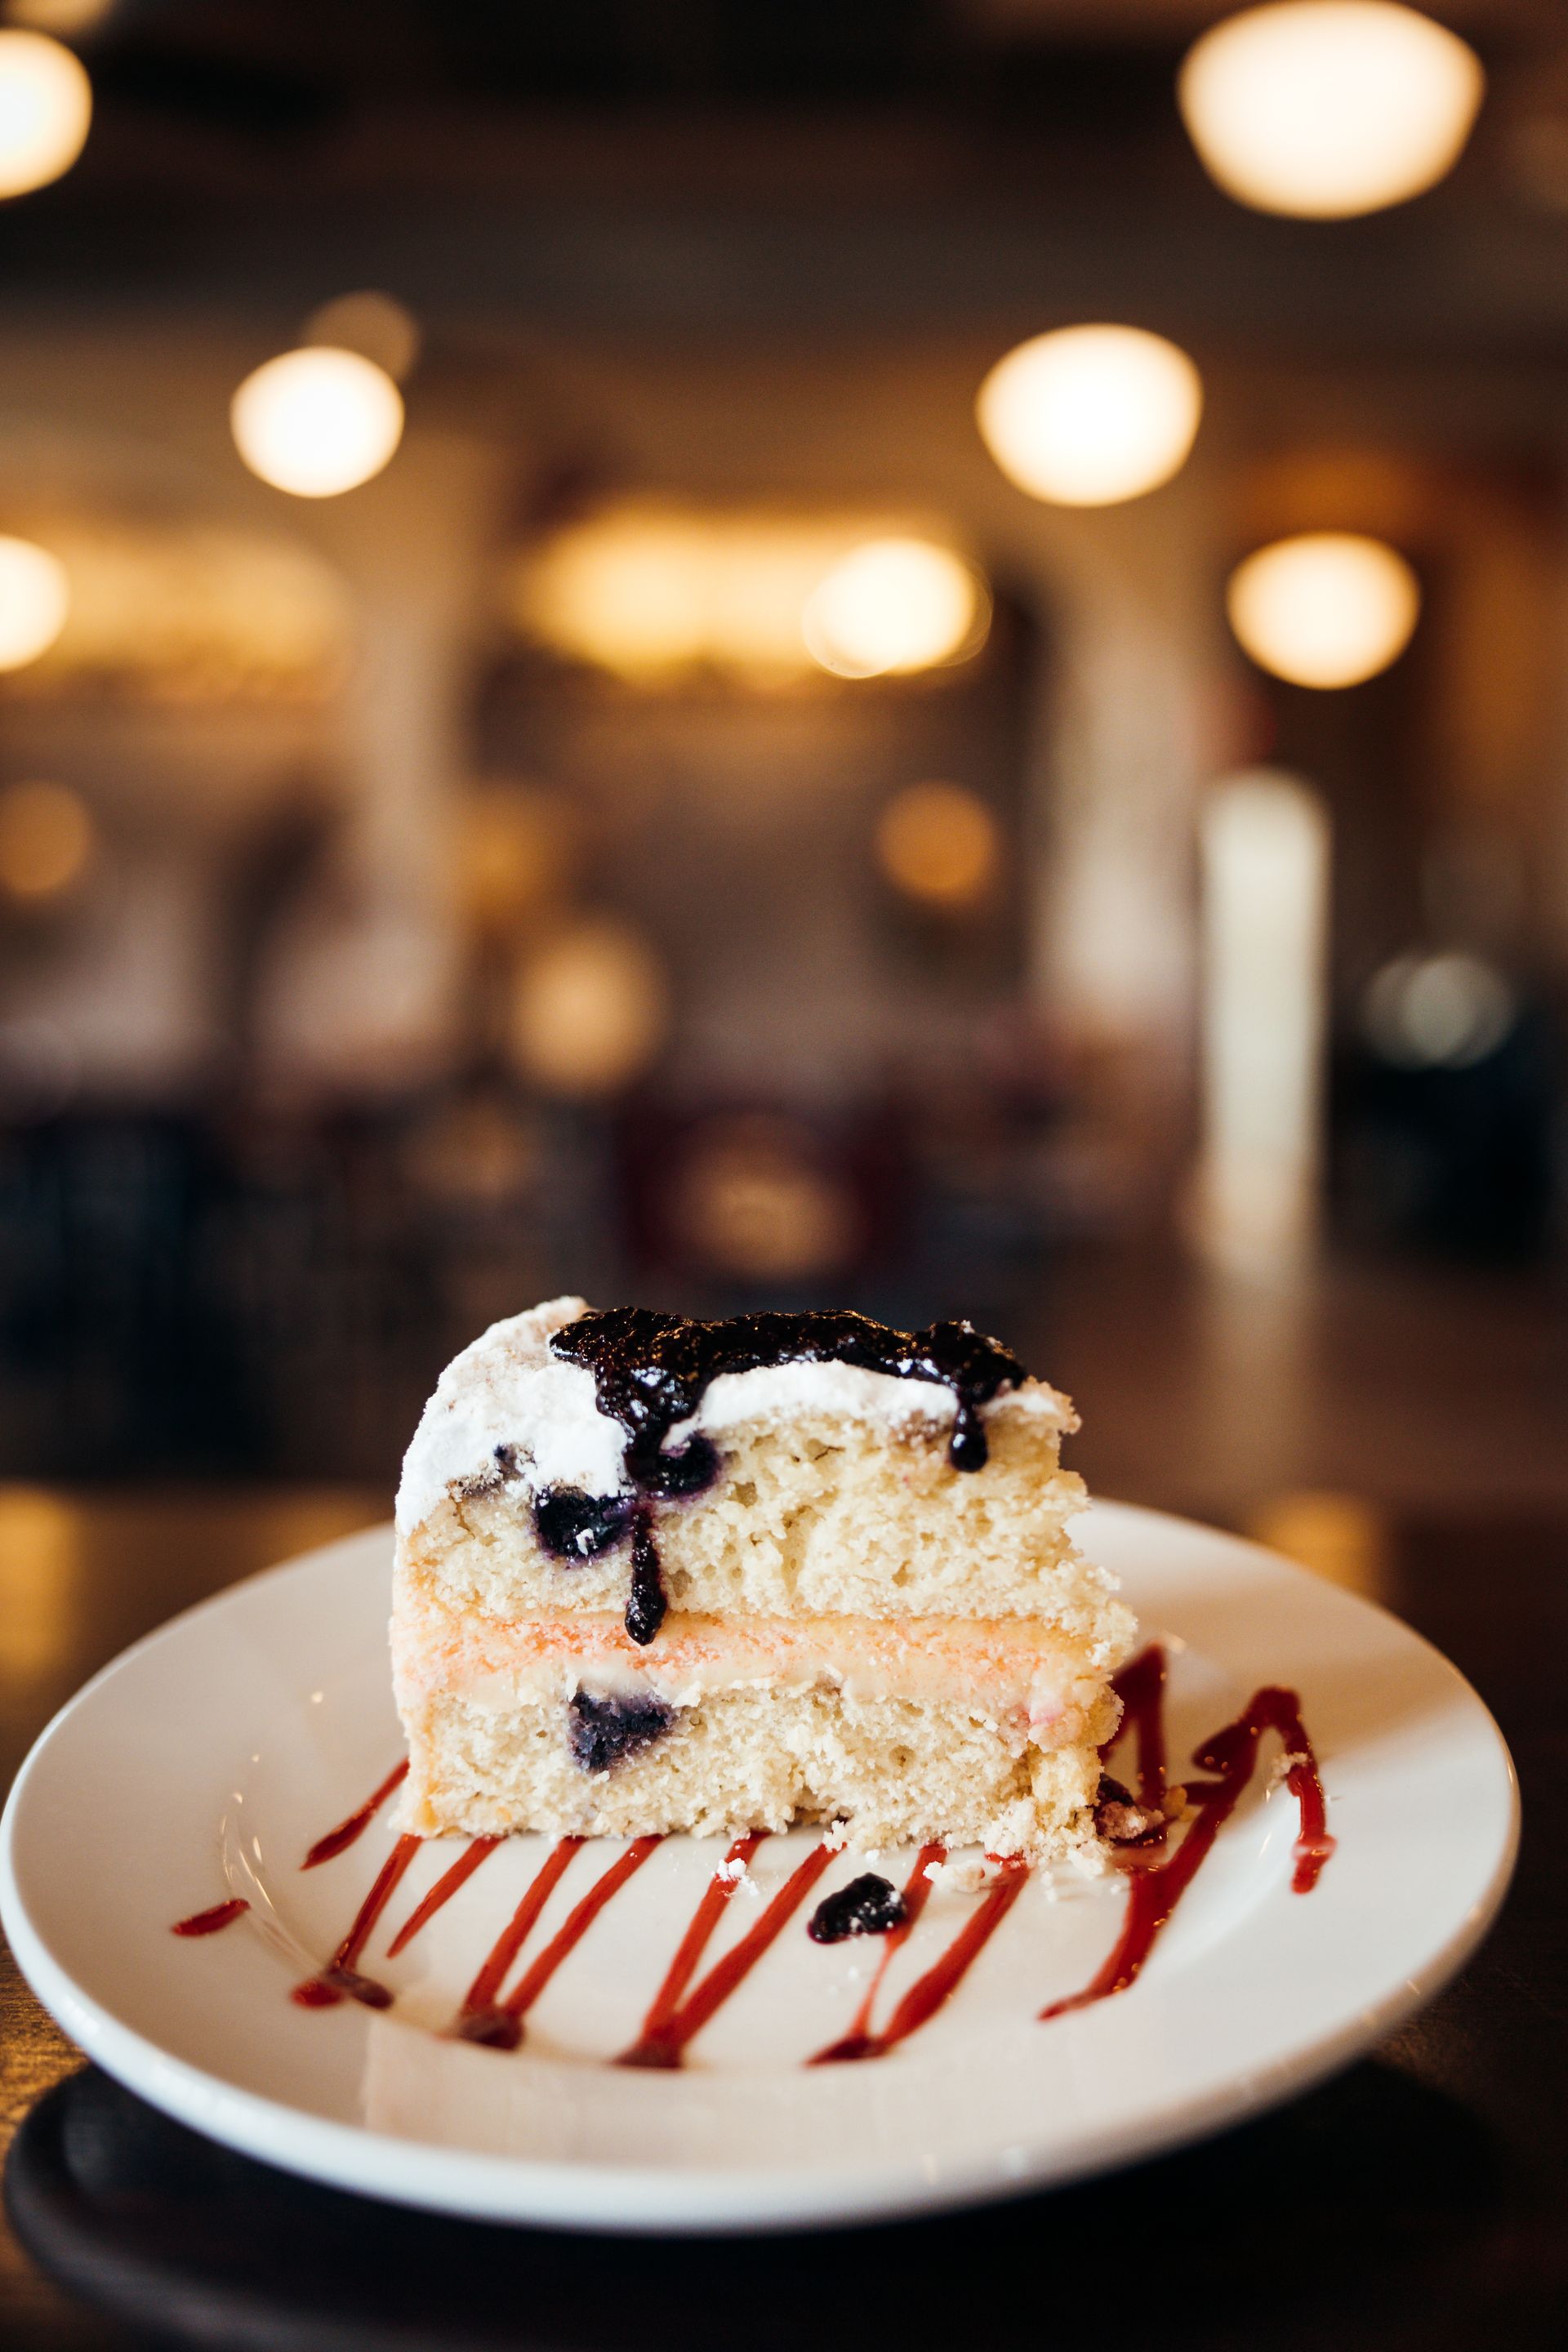 Explore Seasonal Dessert Offerings at Canterbury Hill Winery & Restaurant in Holts Summit, MO.